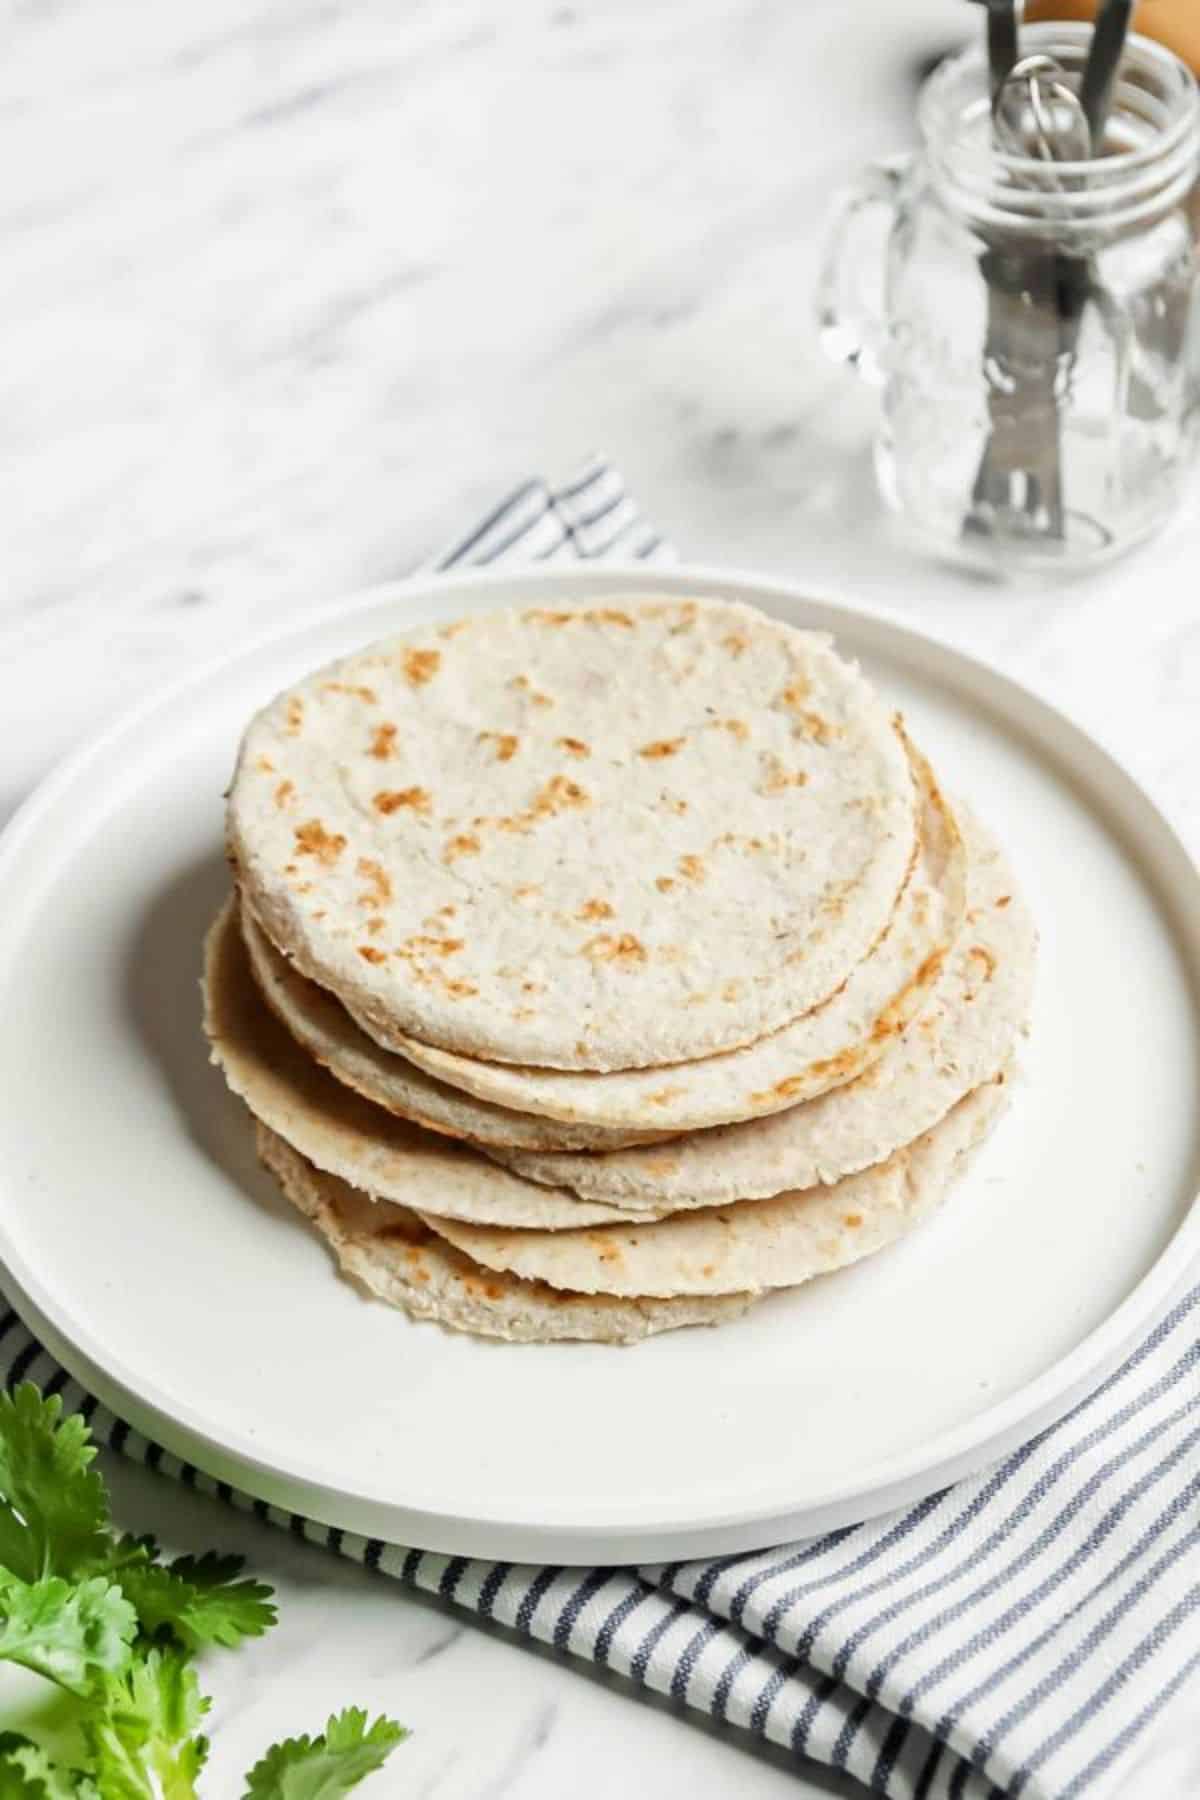 A pile of Coconut Flour Tortillas on a white plate.